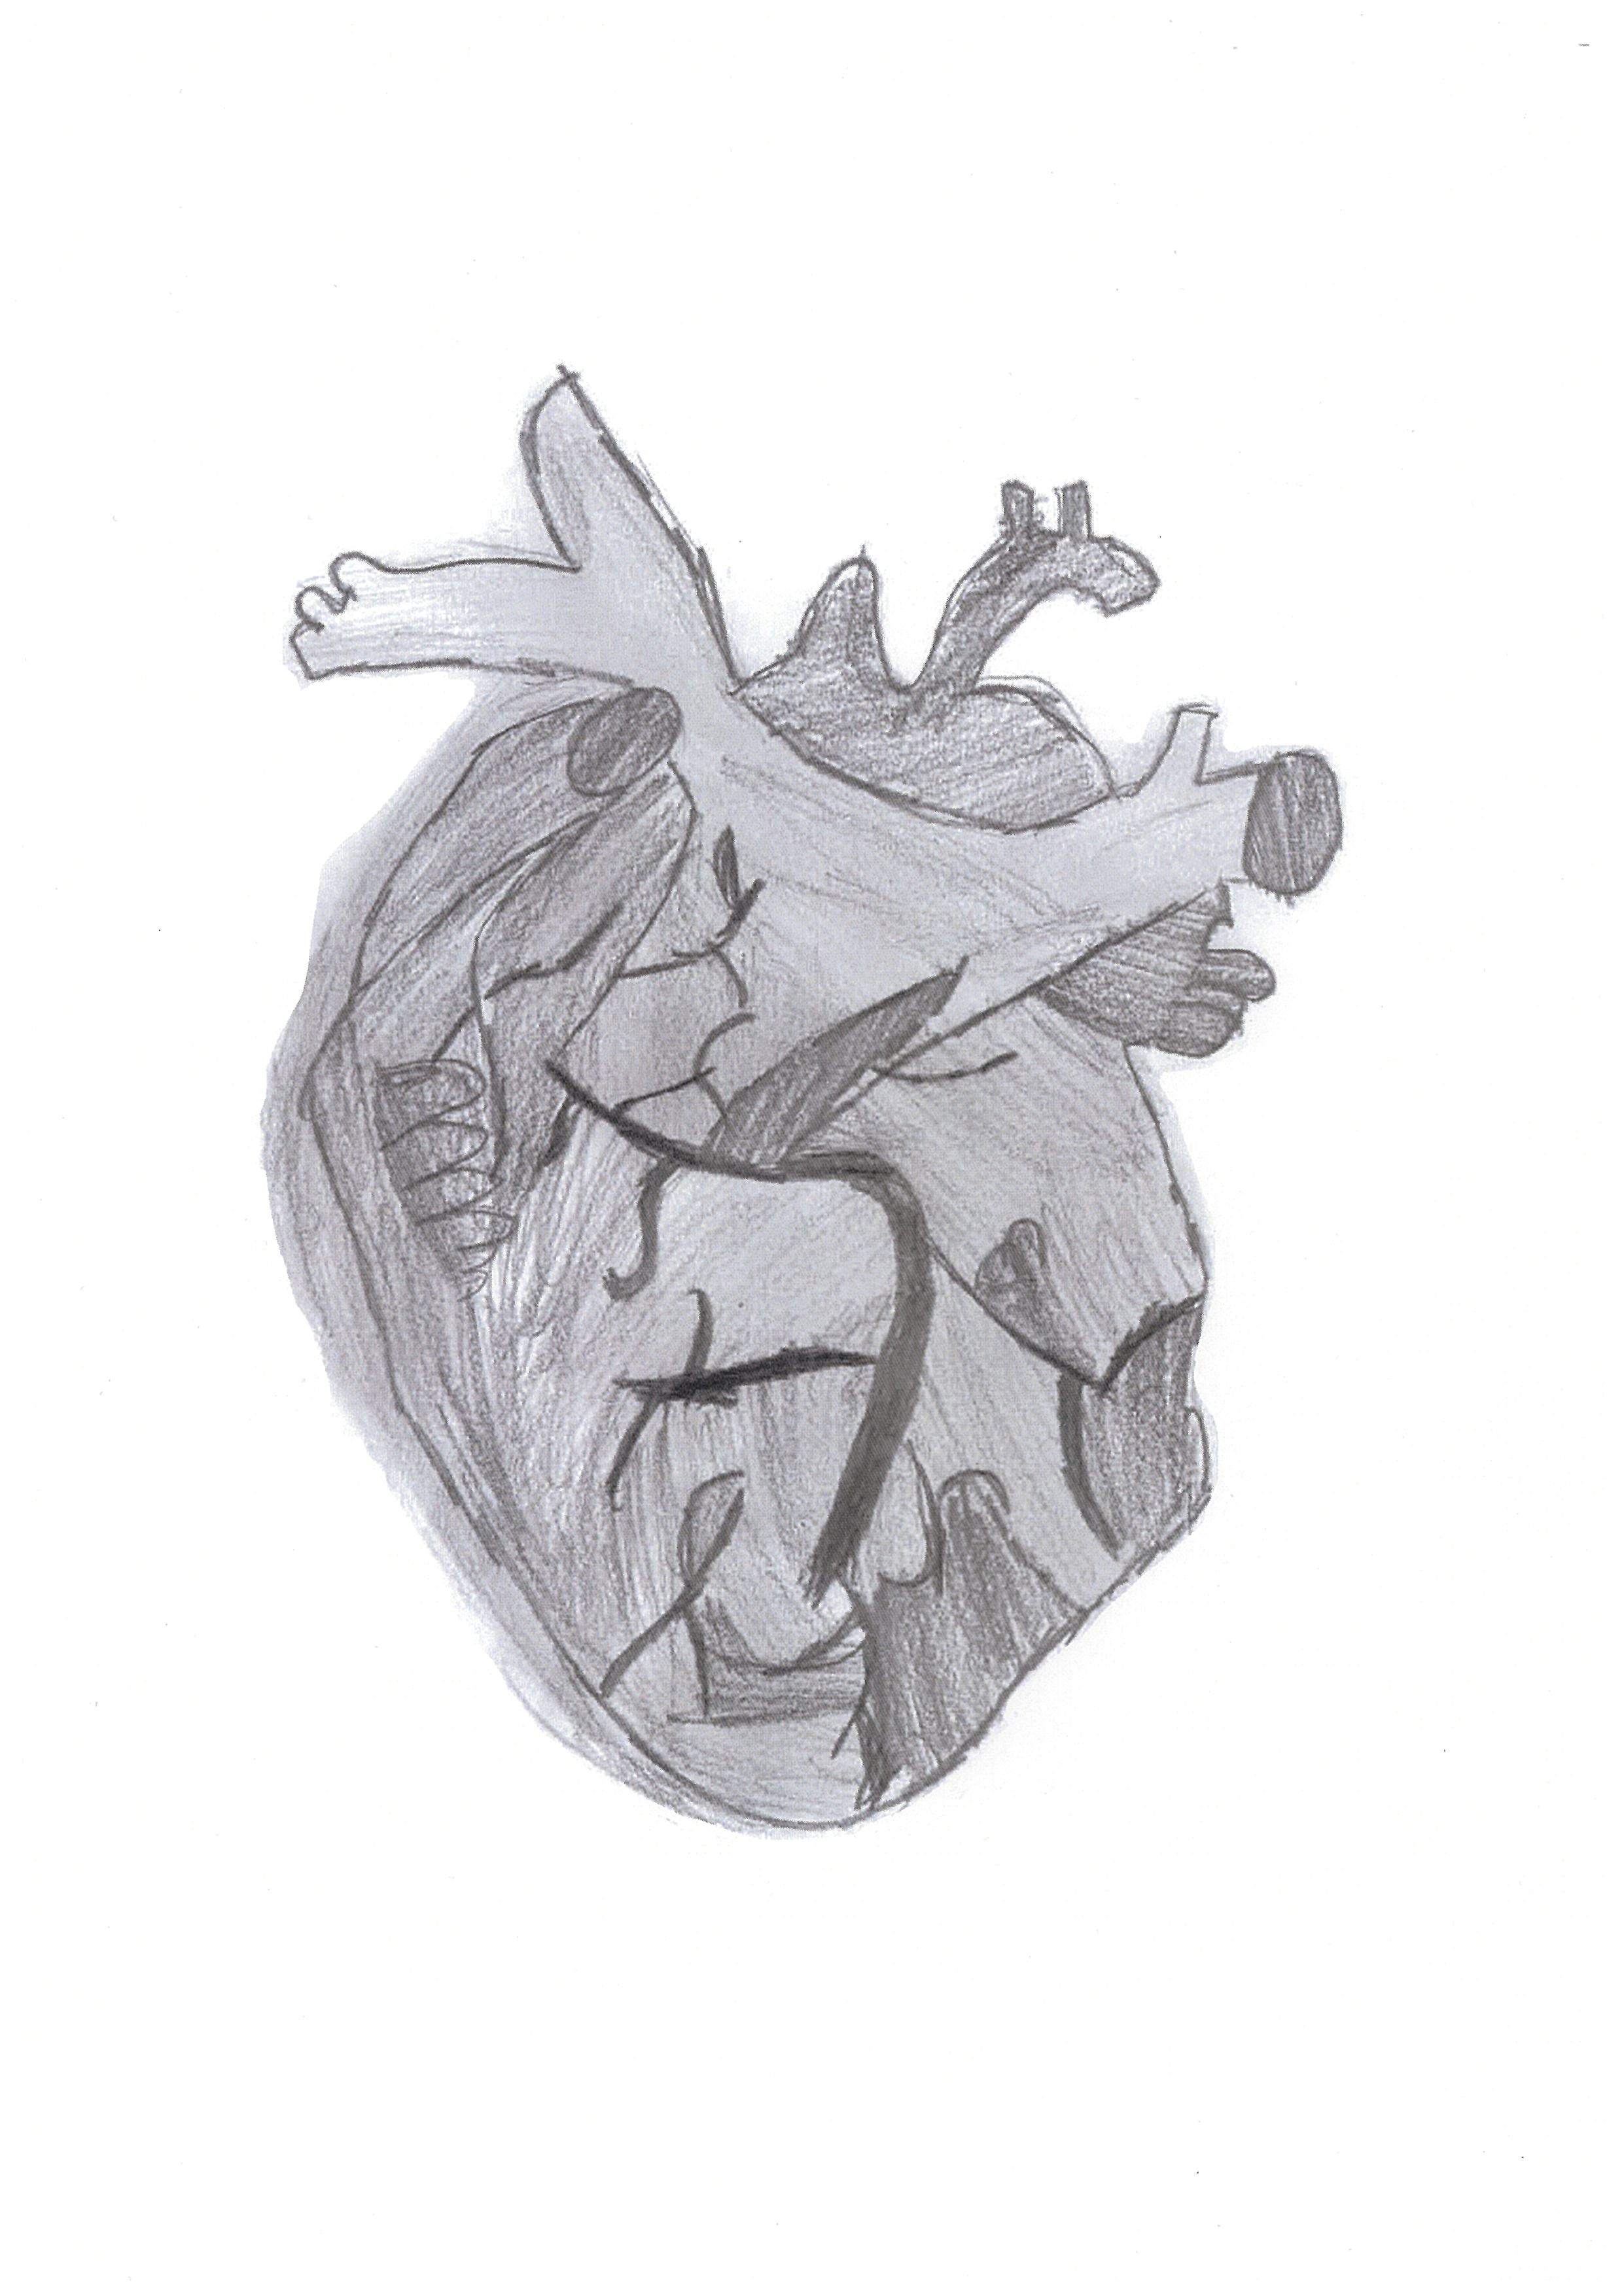 student pencil drawing of the heart using lead pencil